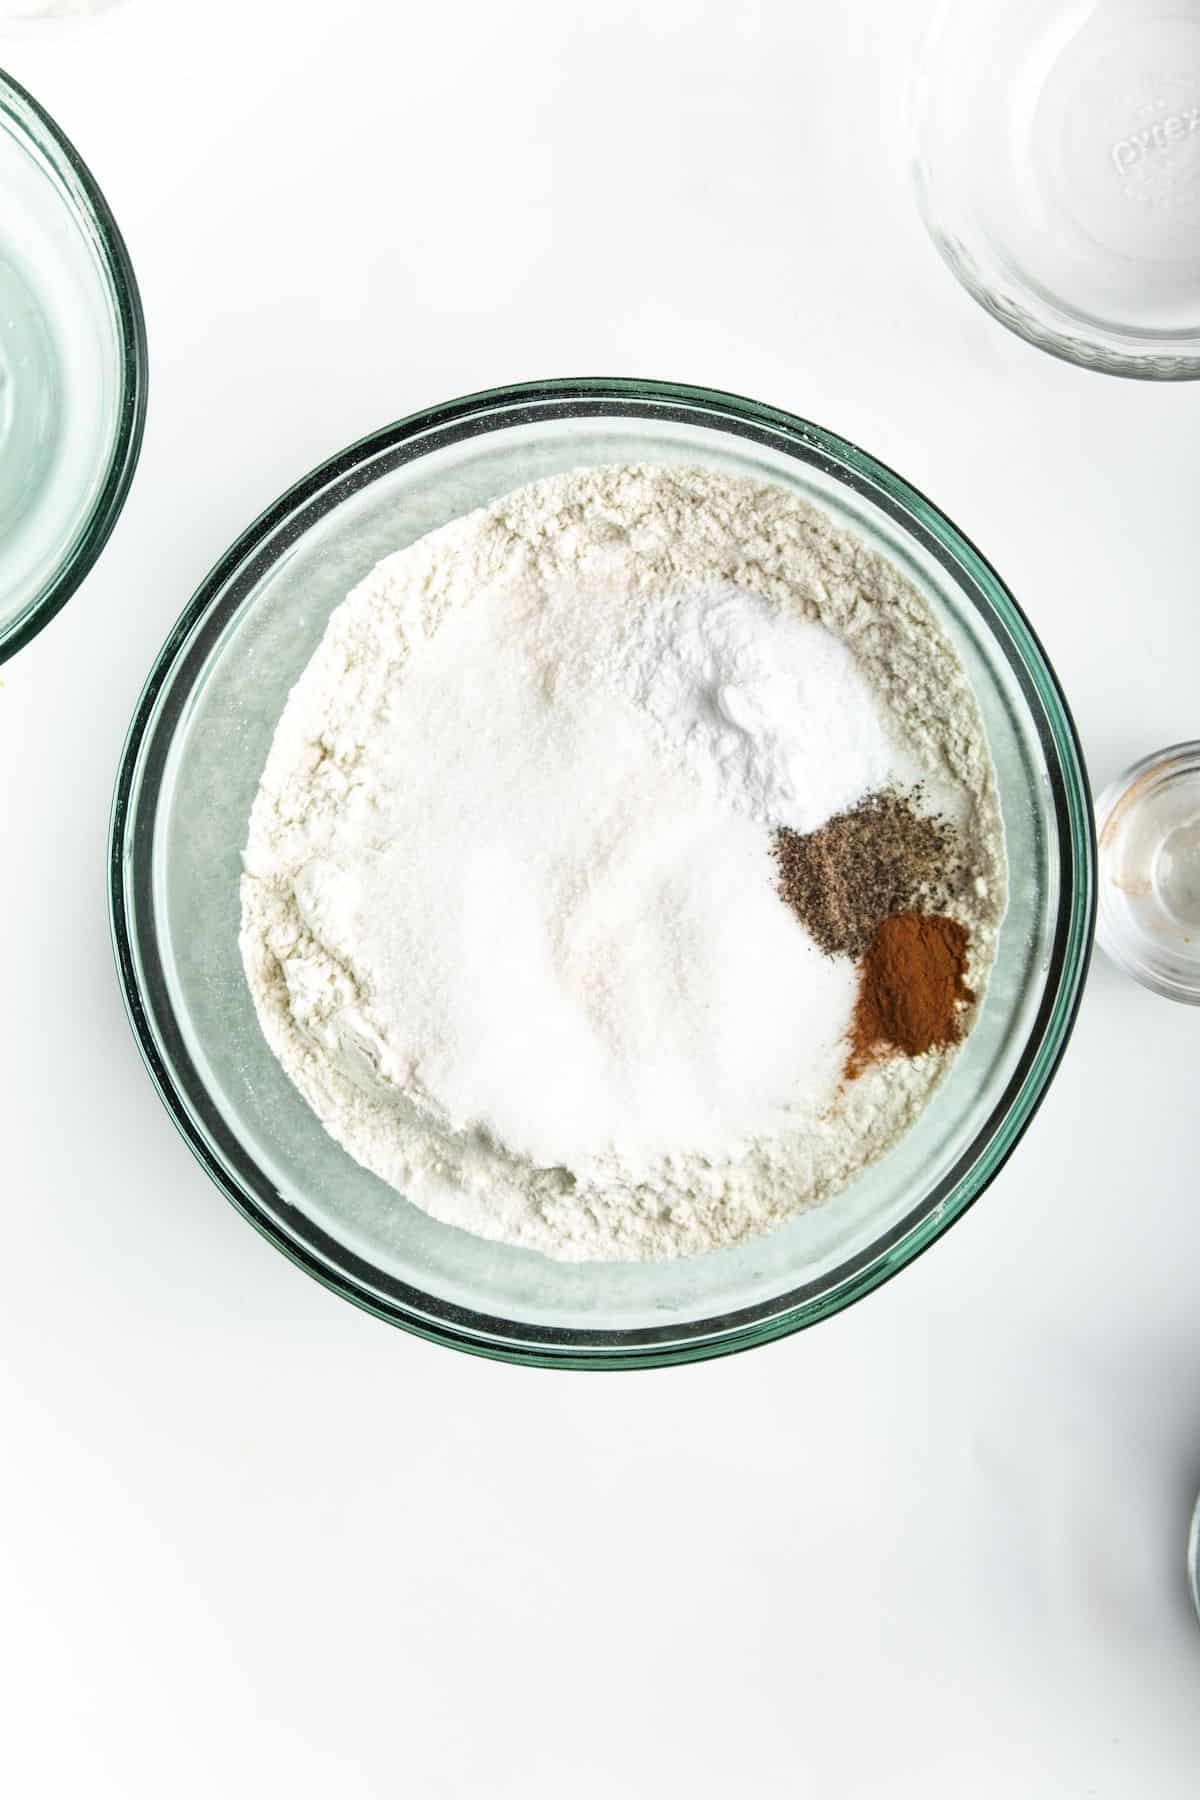 Flour and seasonings in glass bowl on white counter.